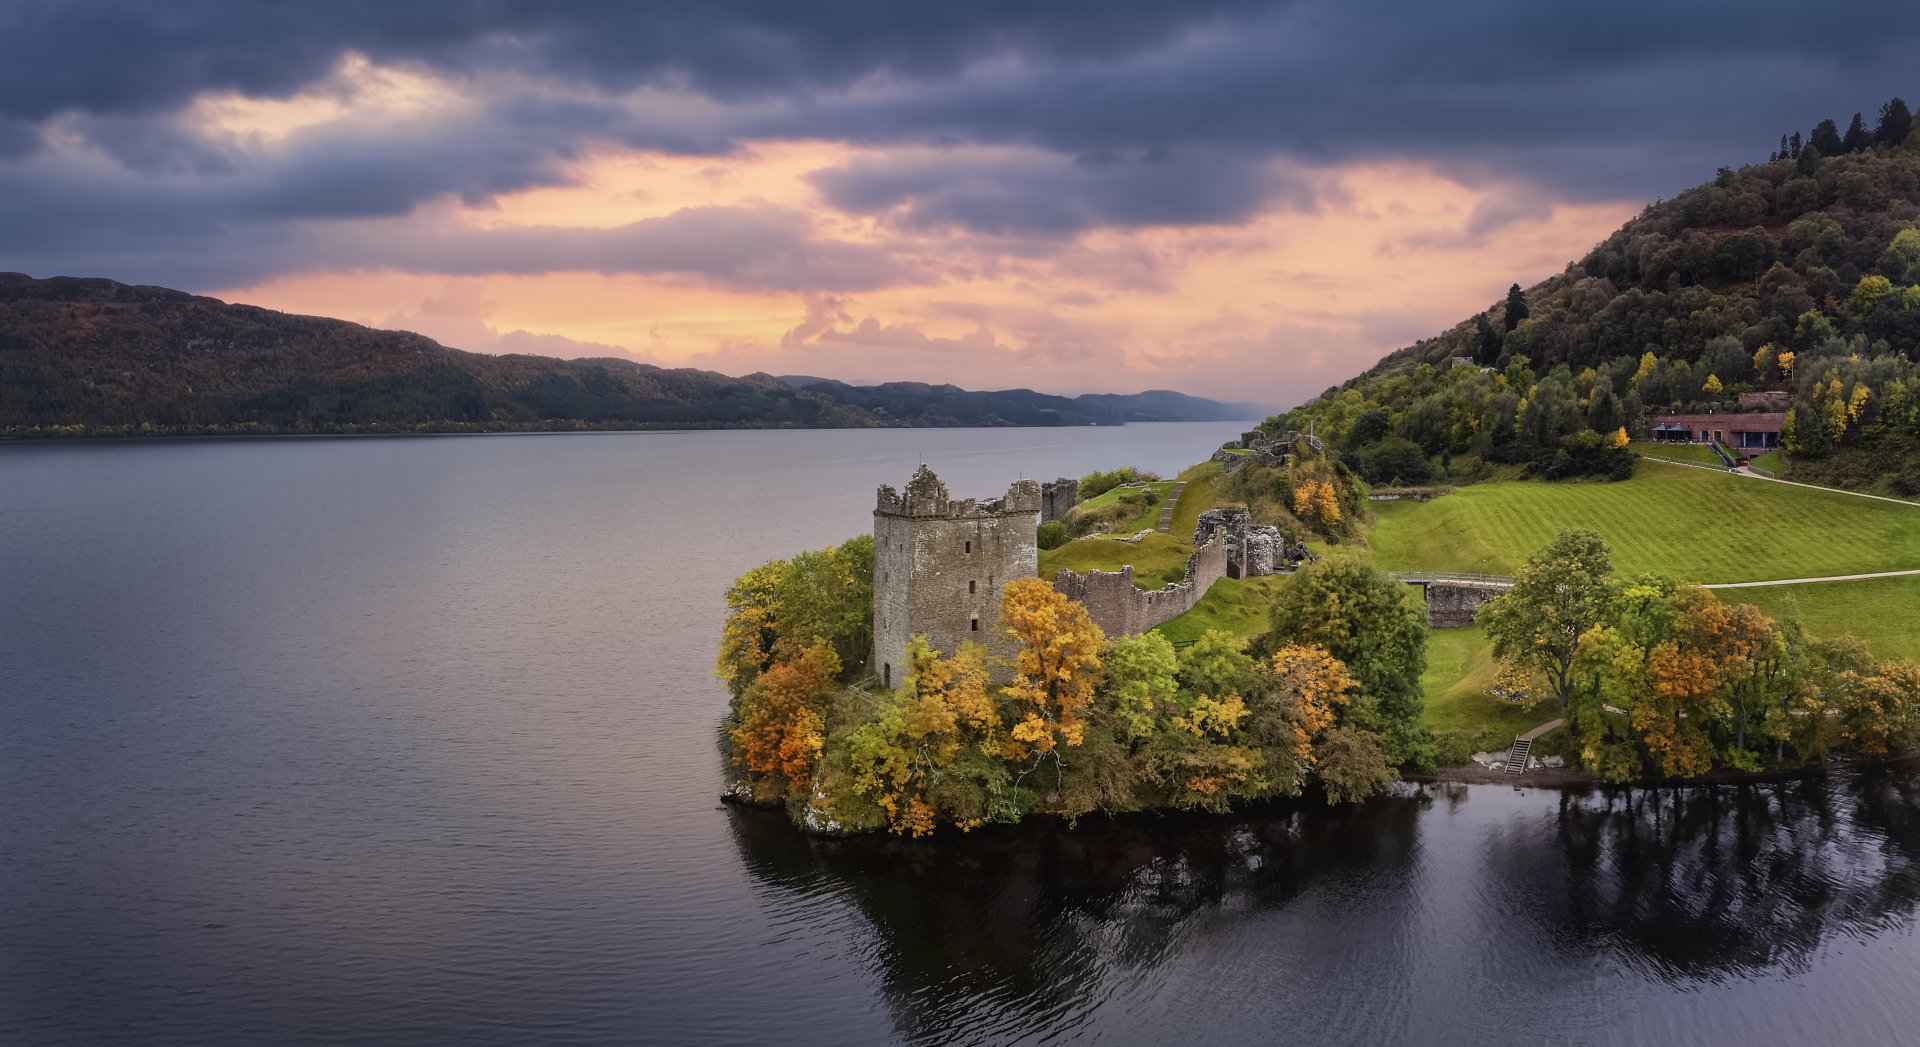 Urquhart Castle and Loch Ness at sunset